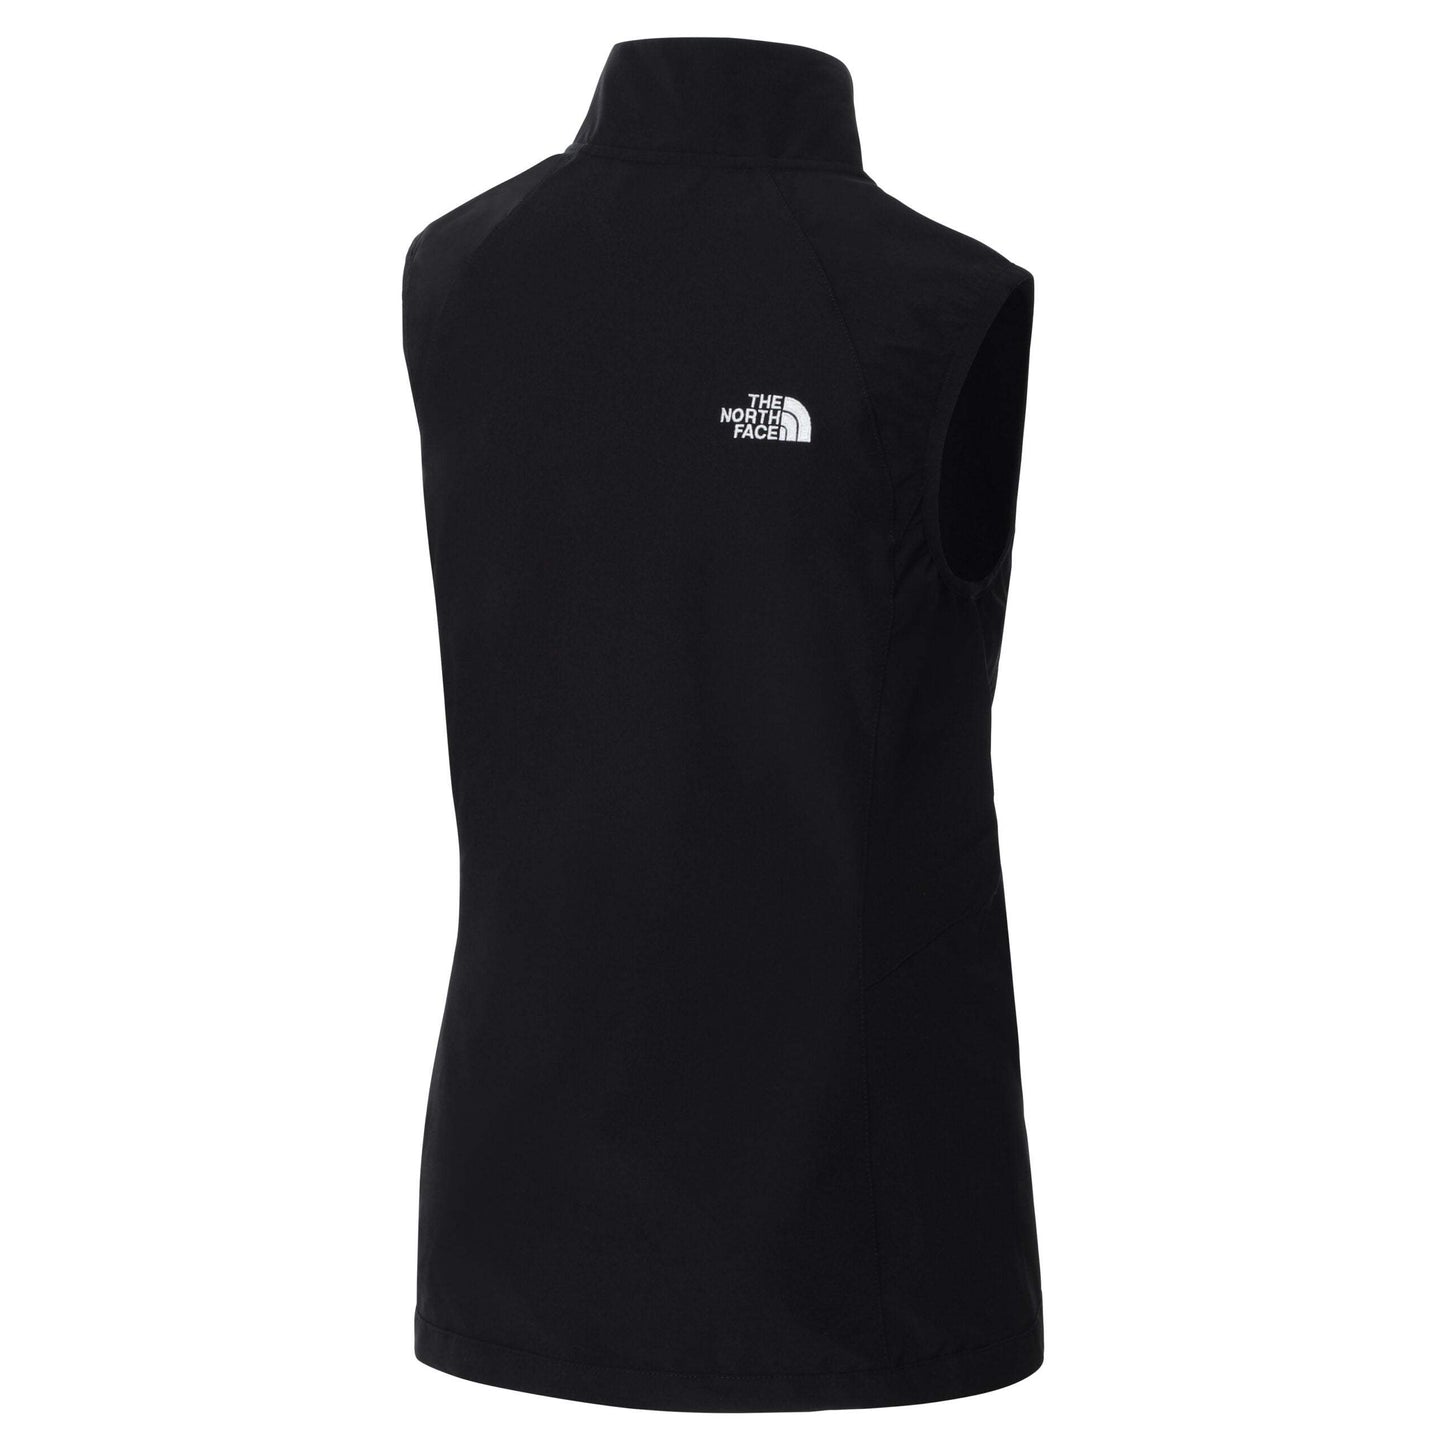 Women’s Nimble Vest by The North Face - Promotions Only Group Limited